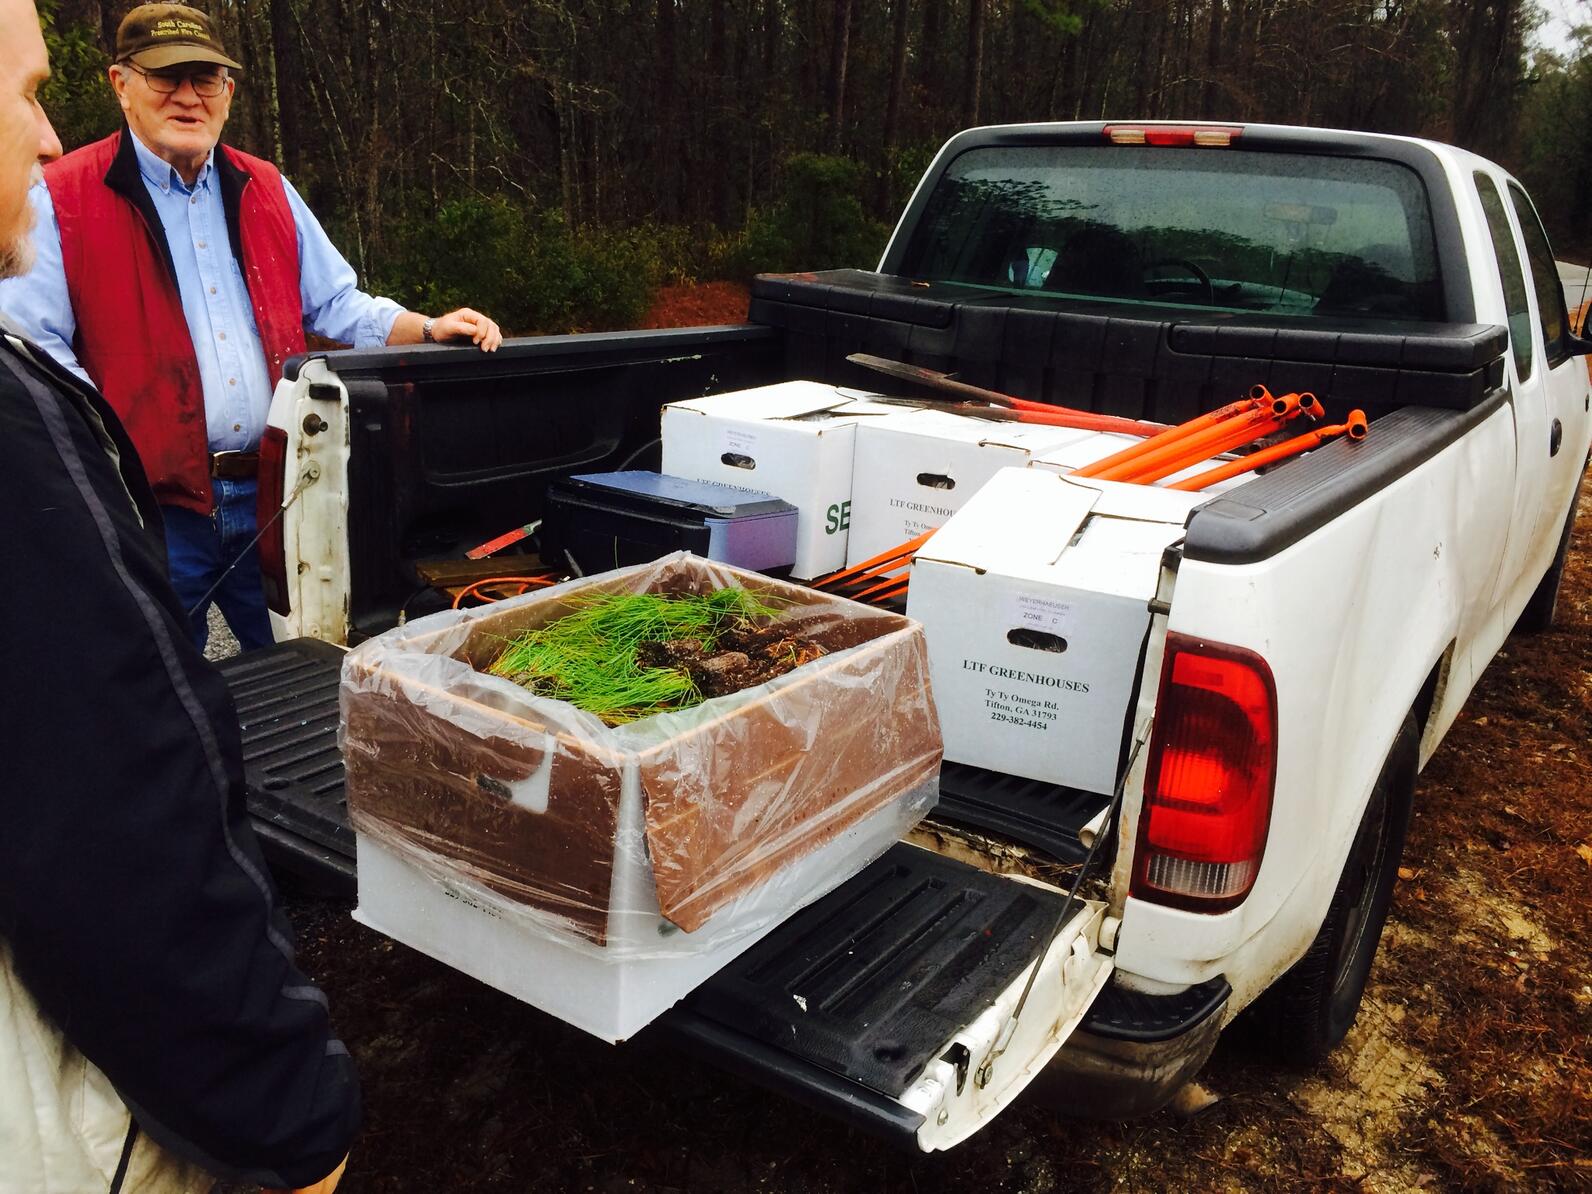 The same men from the previous image inspect a cardboard box full of Longleaf Pine sprouts that has been placed on the bed of a truck. The sprouts will be used to plant a whole new forest of Longleaf Pine.